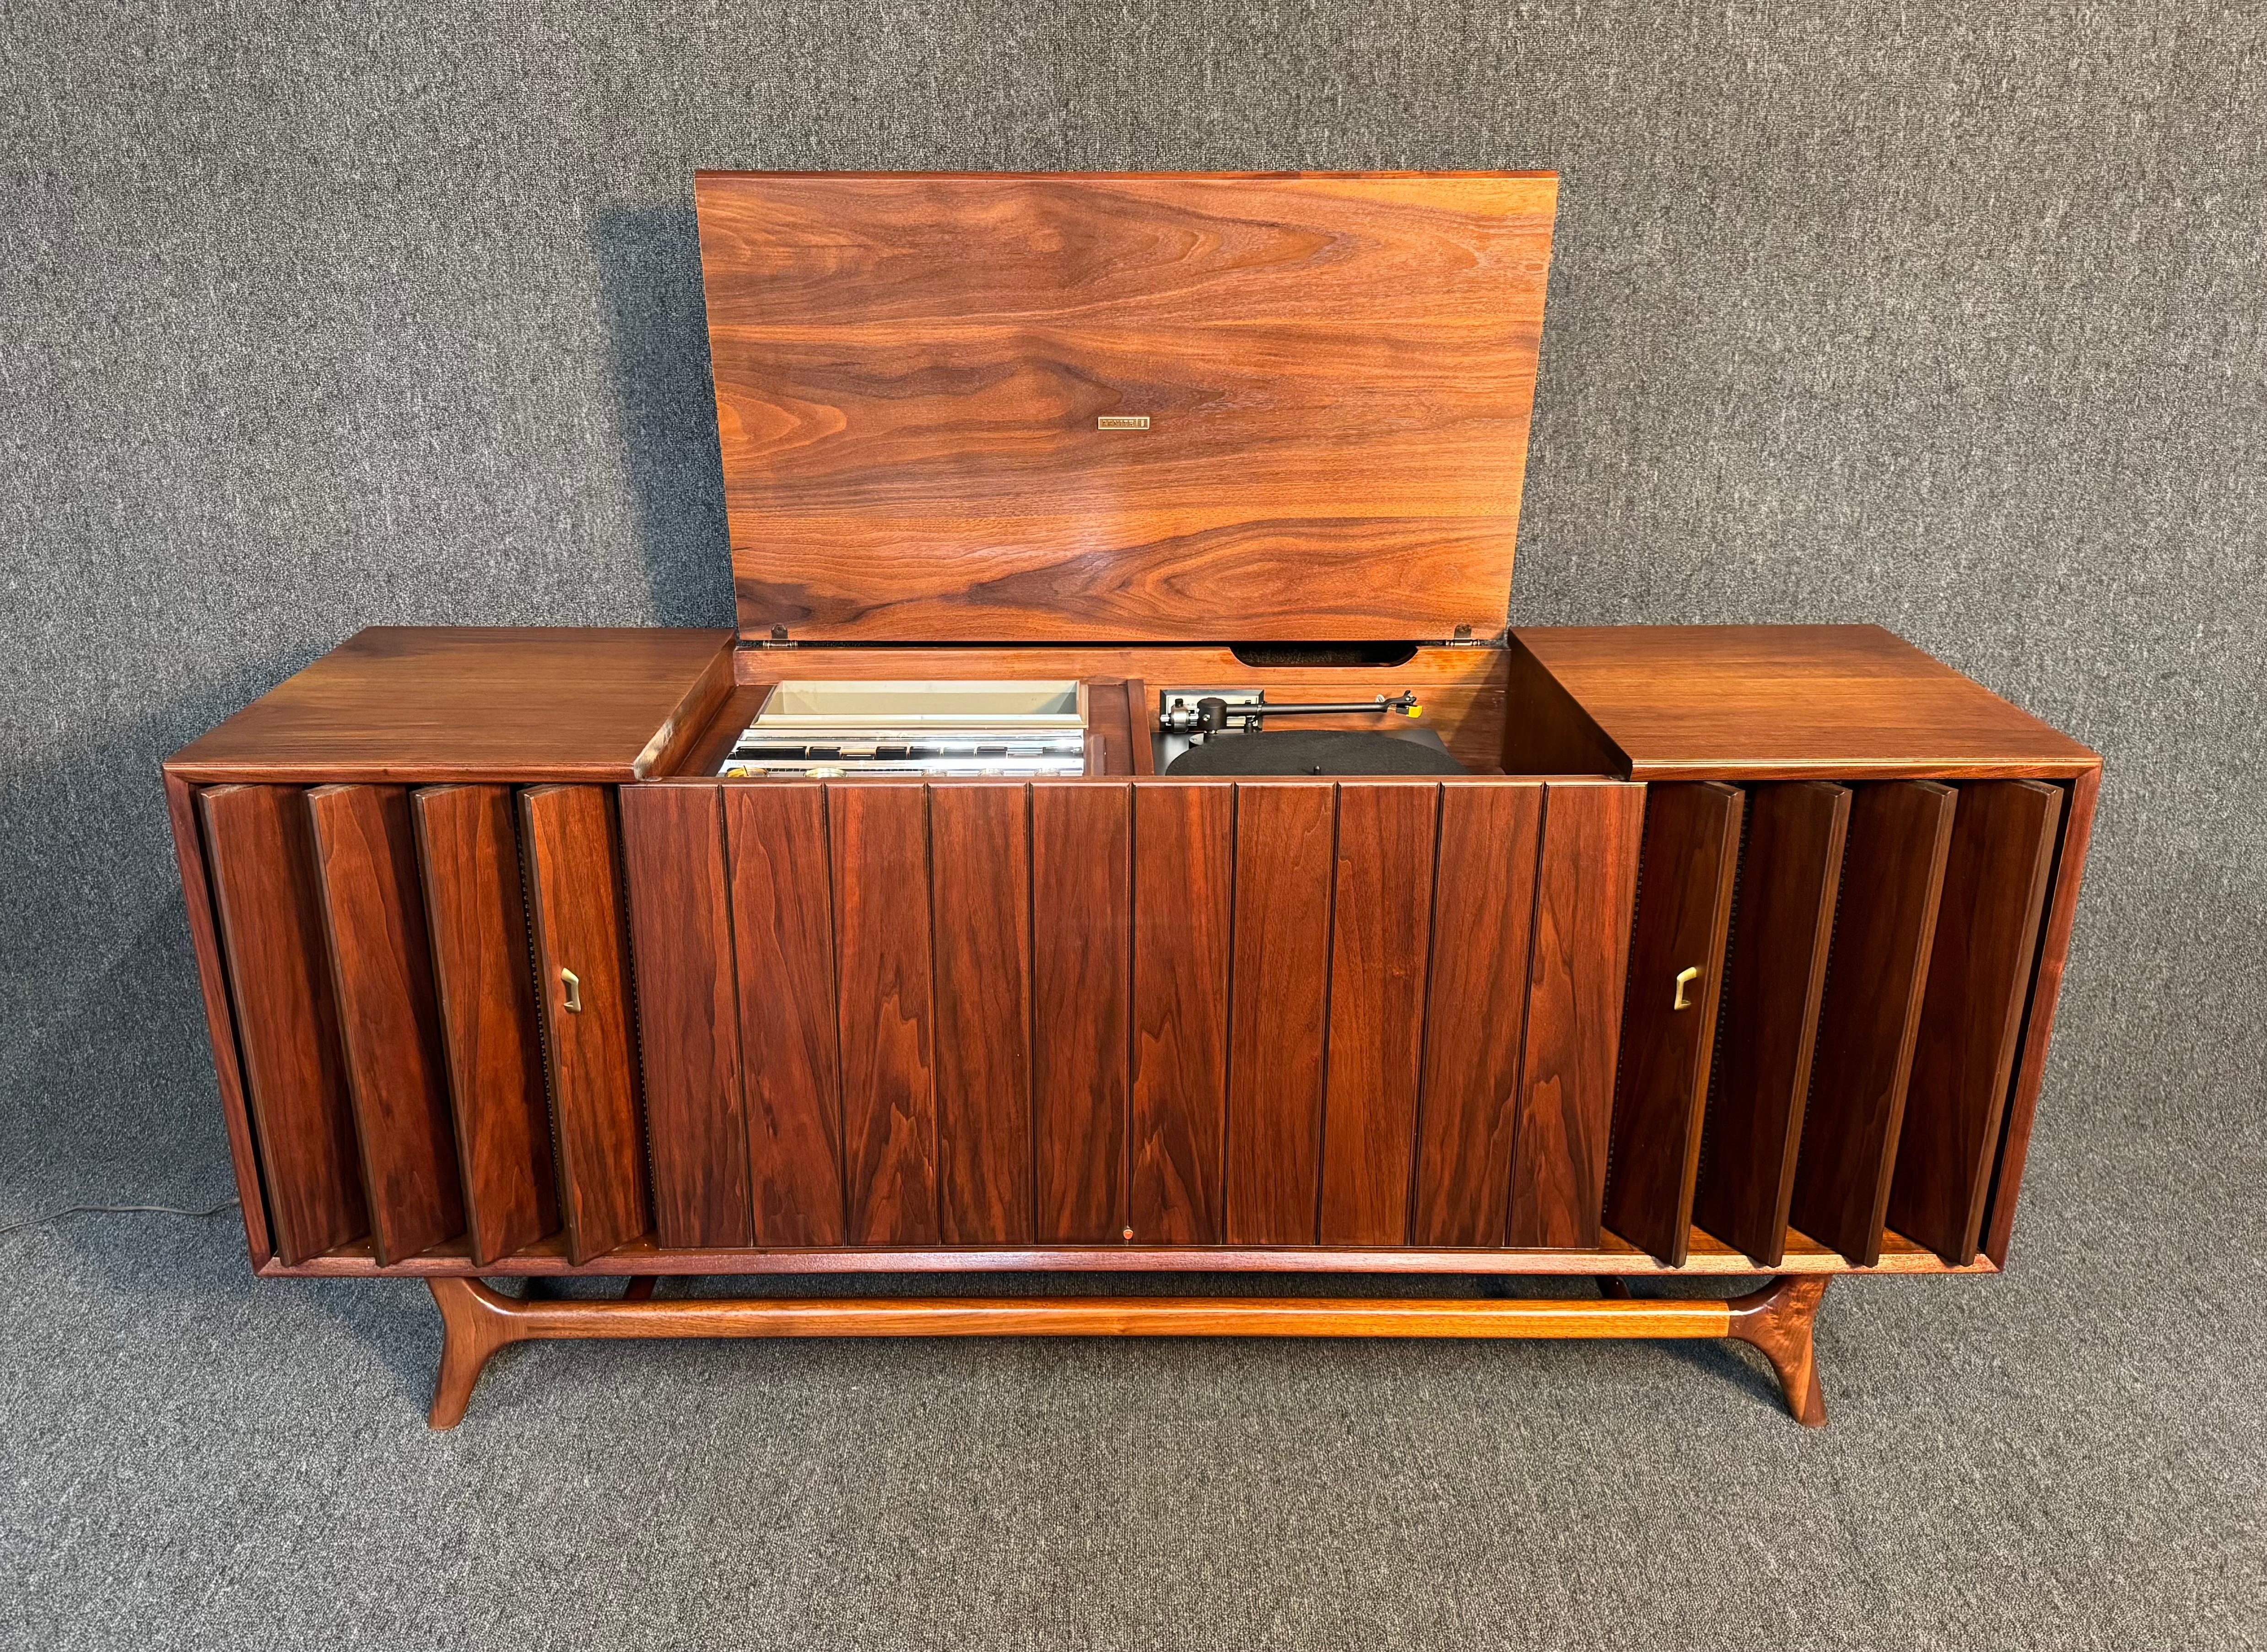 zenith console record player